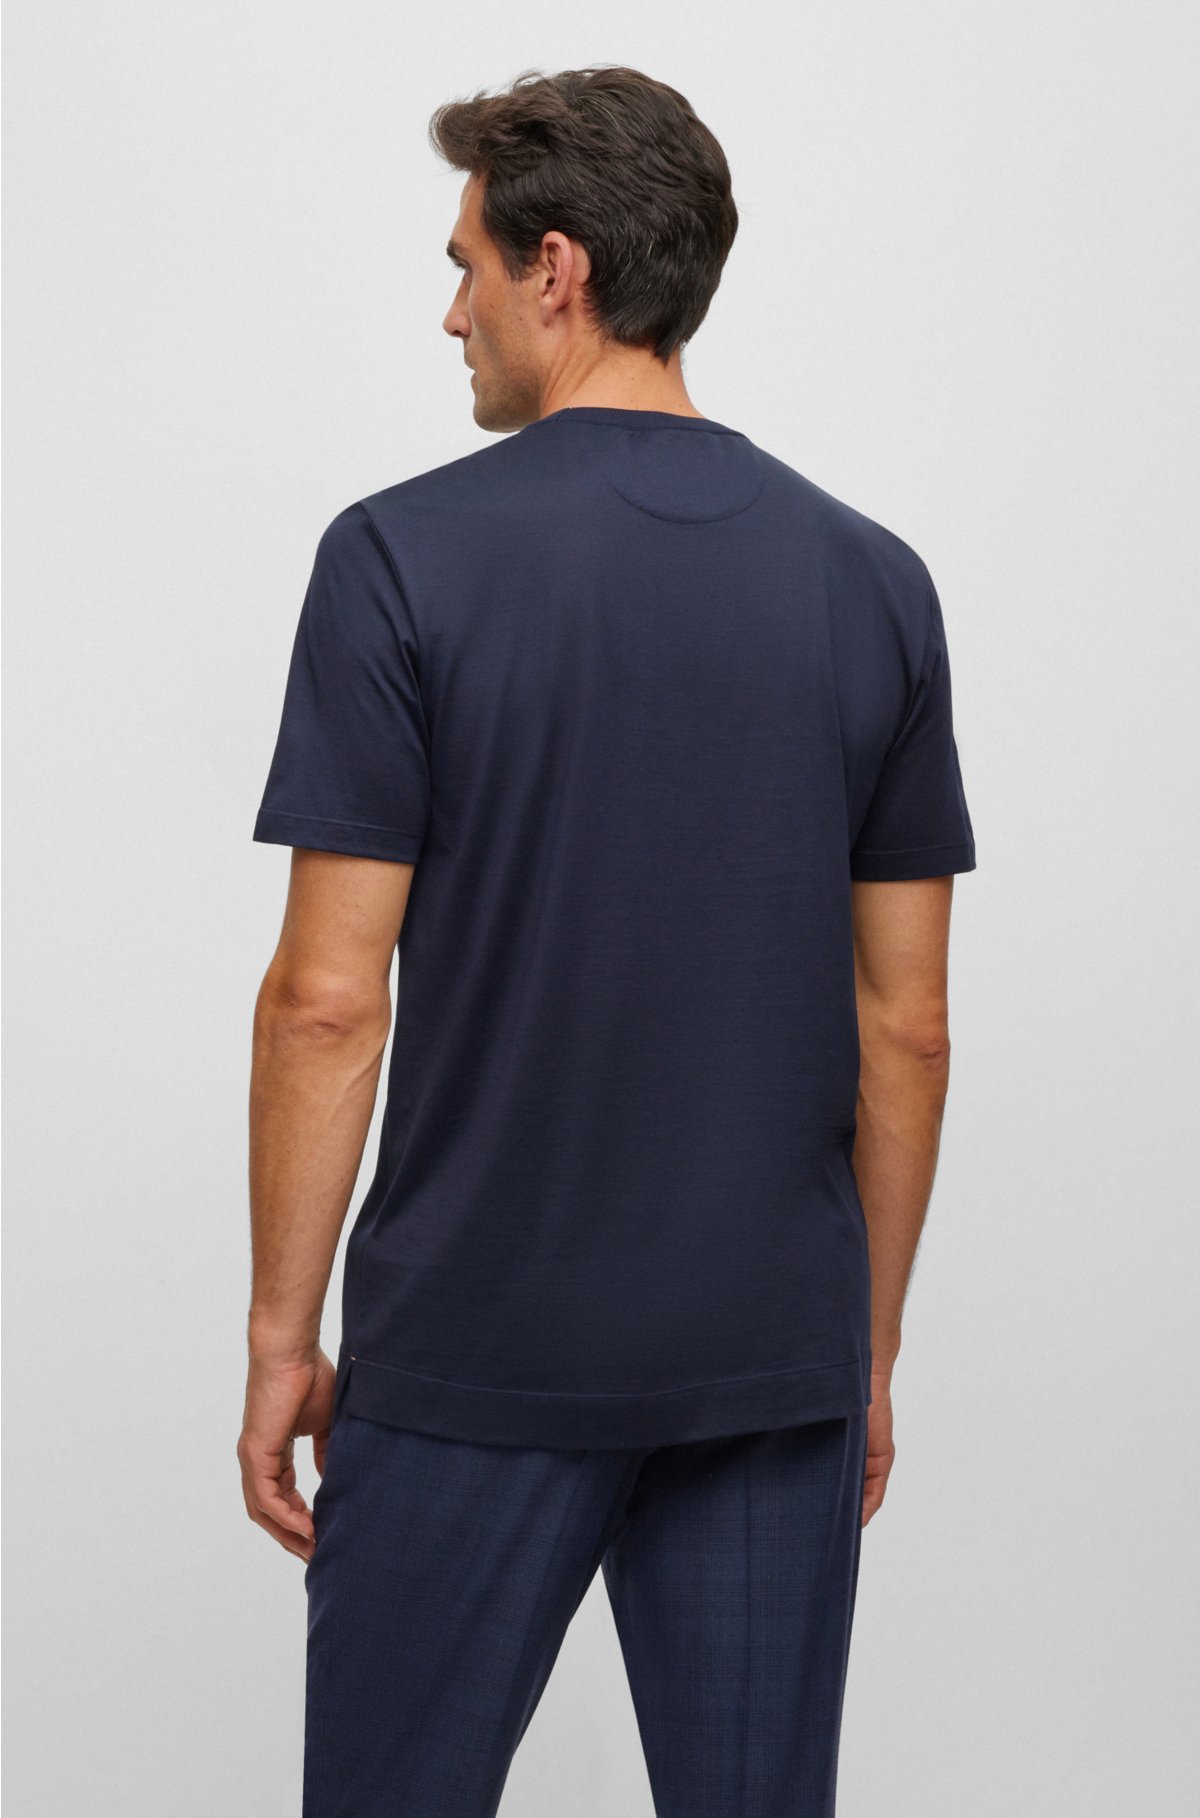 Cotton-silk T-shirt with fineline stripes and double collar, Dark Blue